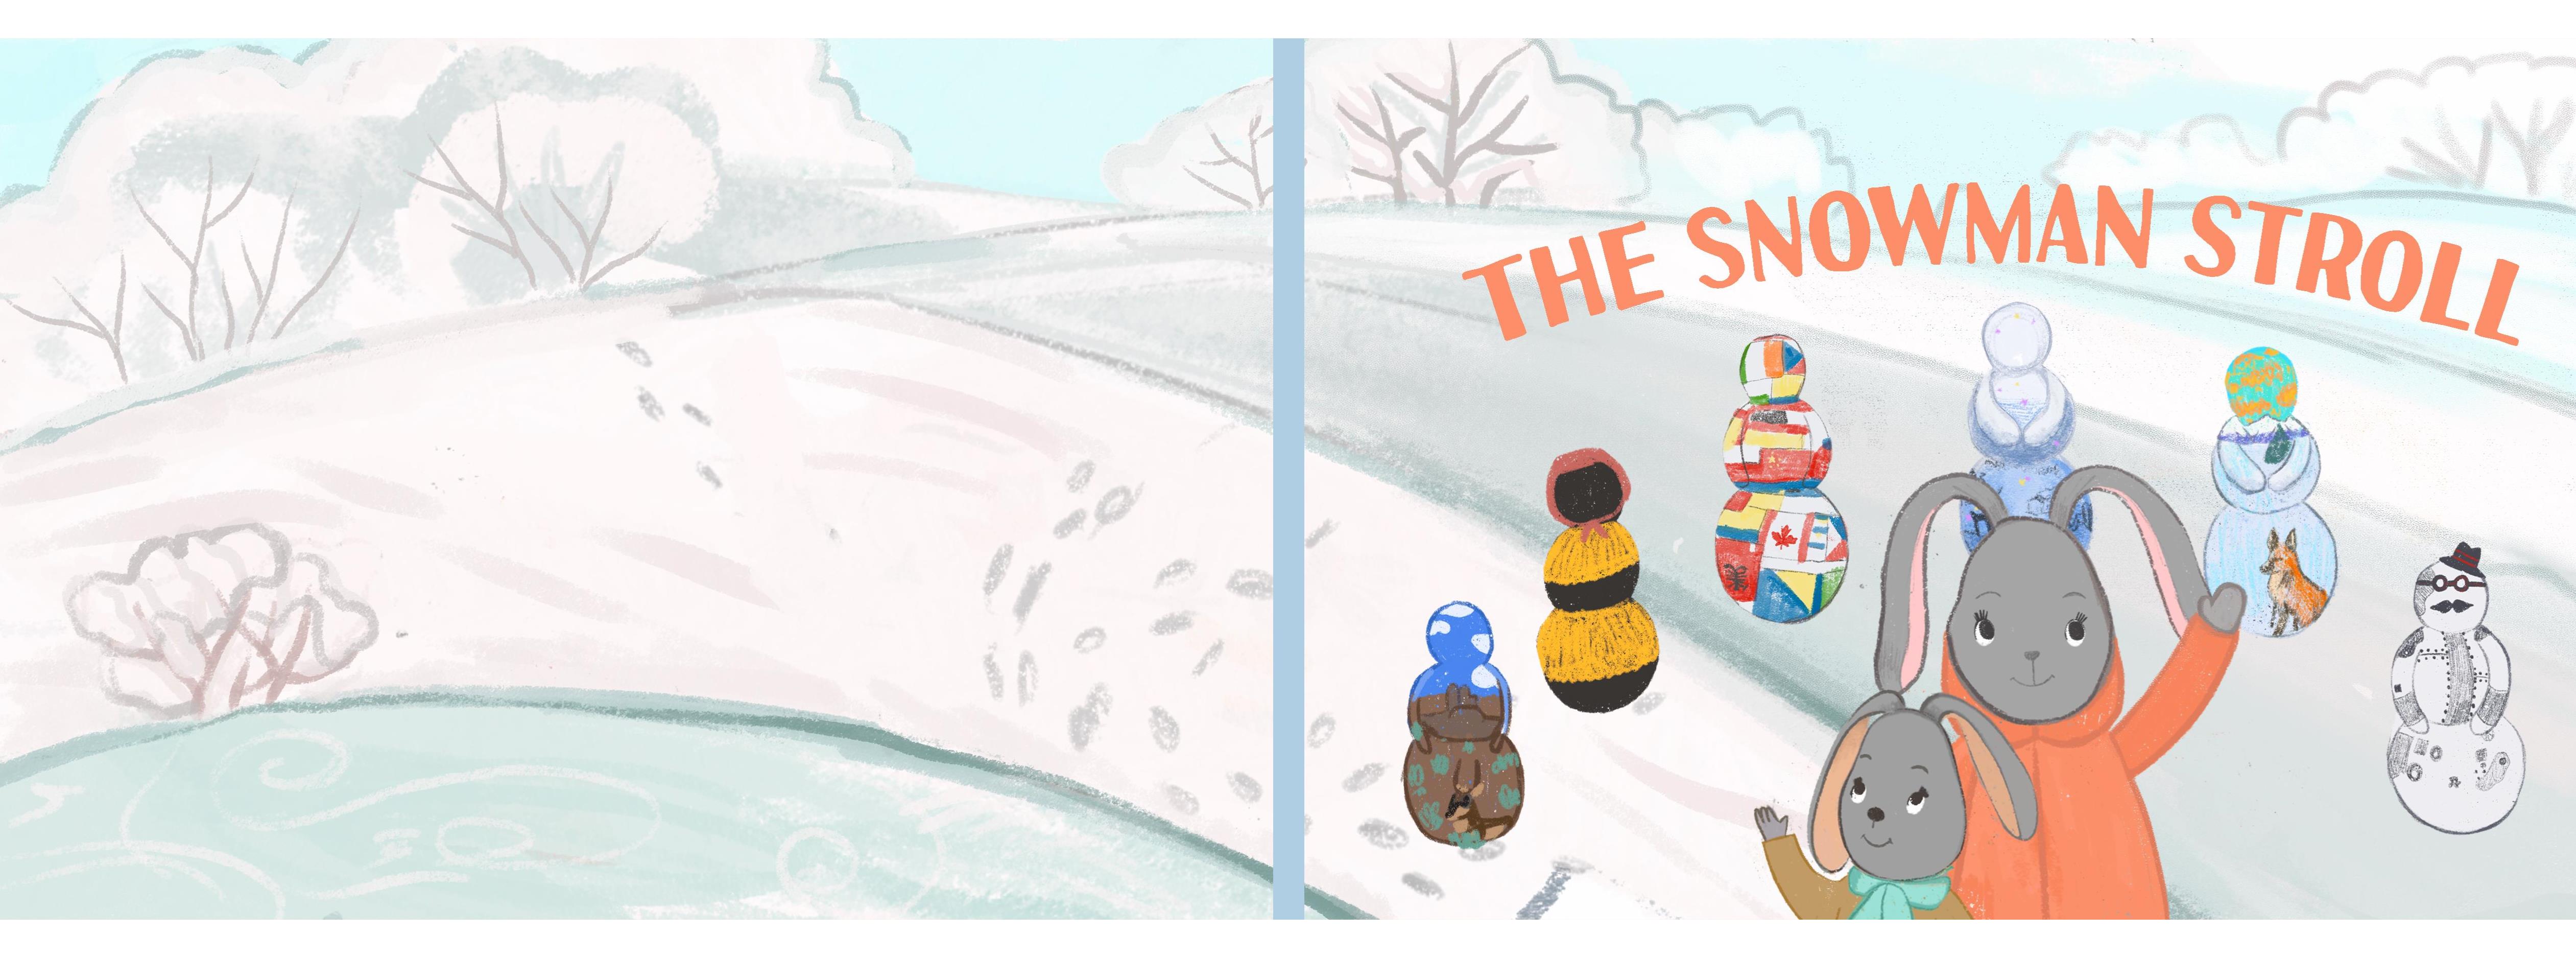 The Snowman Stroll cover image